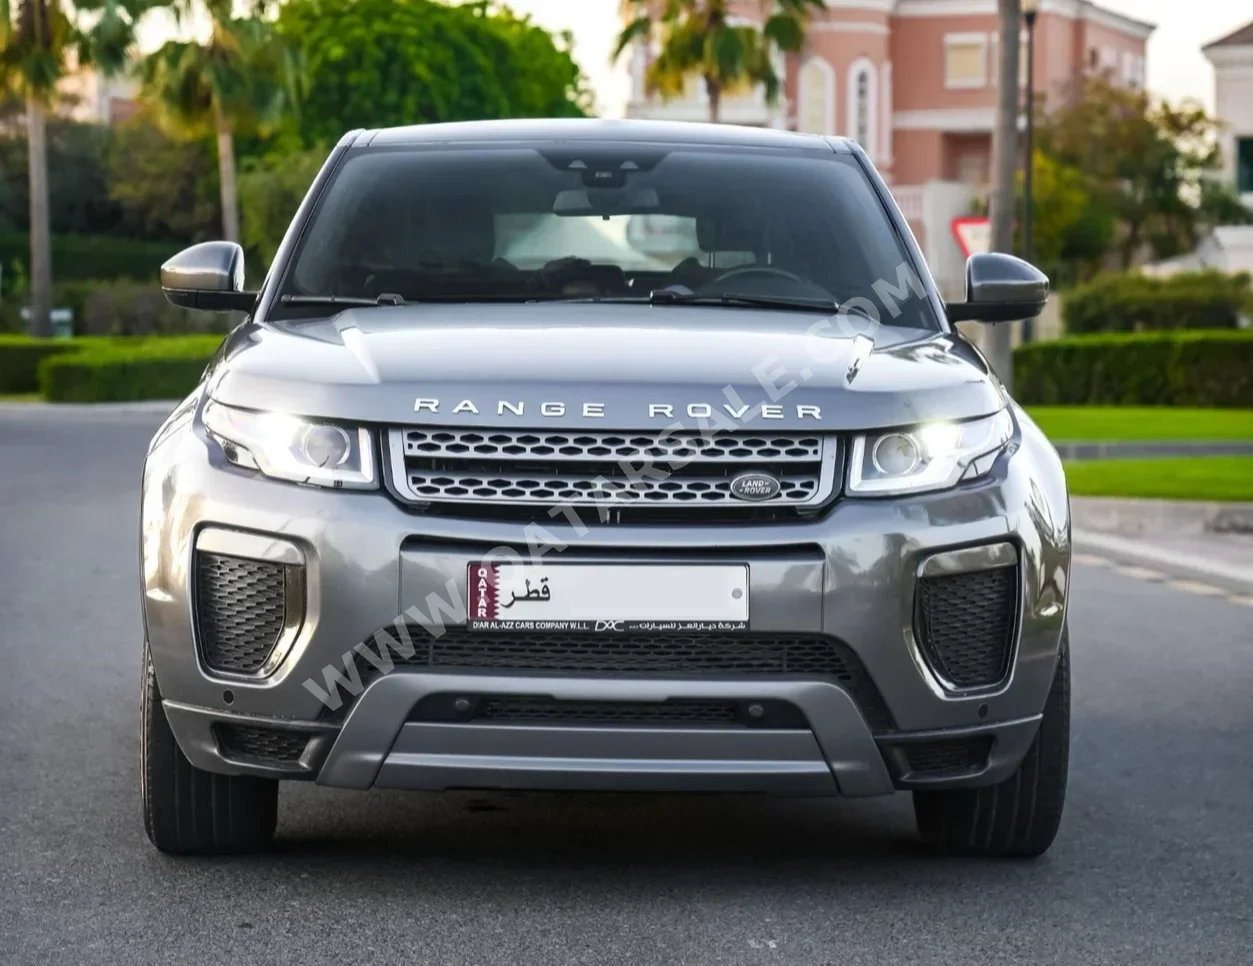 Land Rover  Evoque  2018  Automatic  47,000 Km  4 Cylinder  Four Wheel Drive (4WD)  SUV  Silver